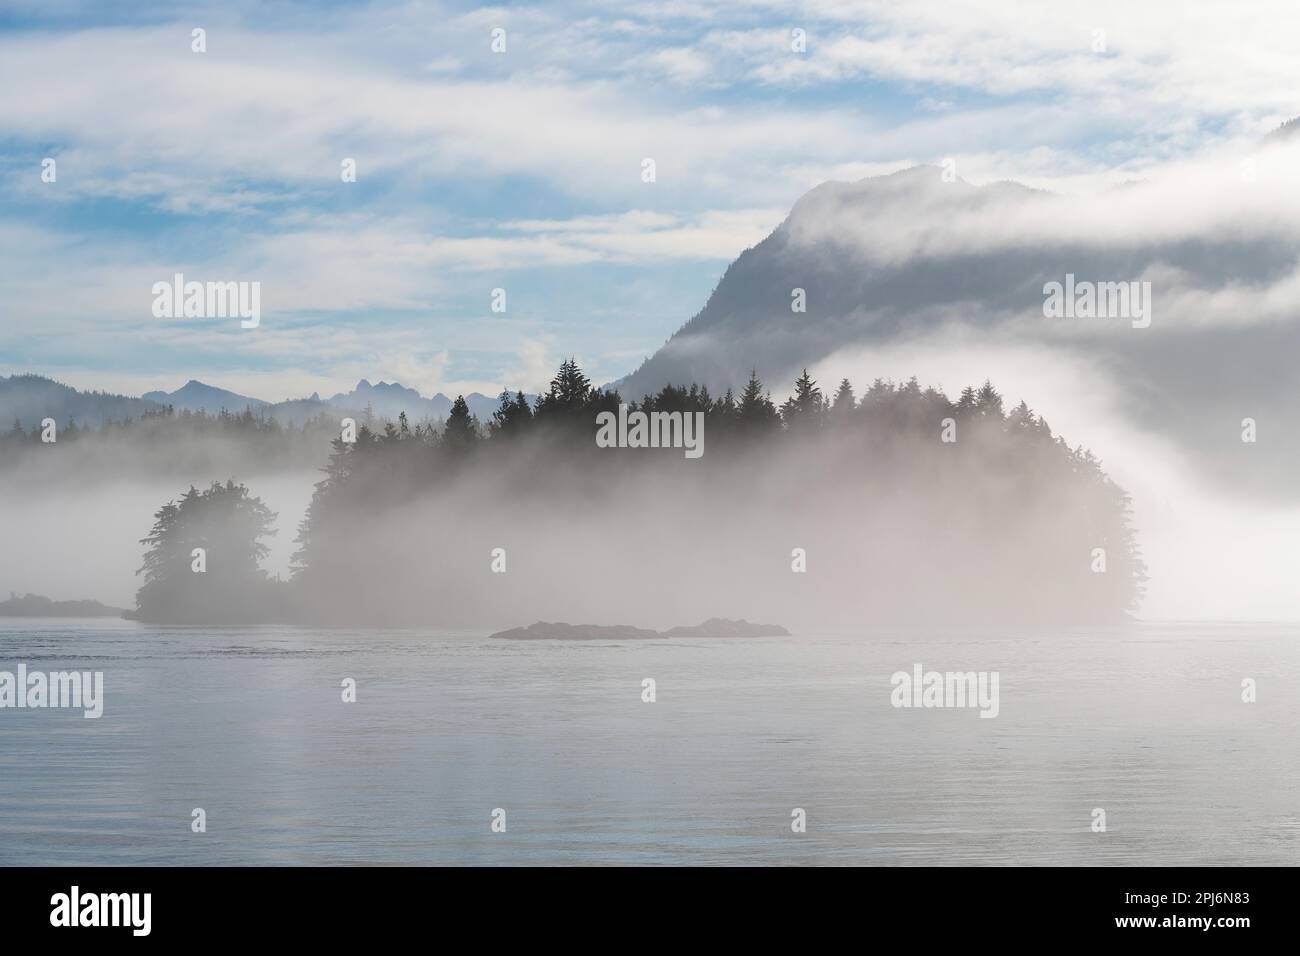 Meares island in the mist seen from Tofino harbor, Vancouver Island, British Columbia, Canada. Stock Photo